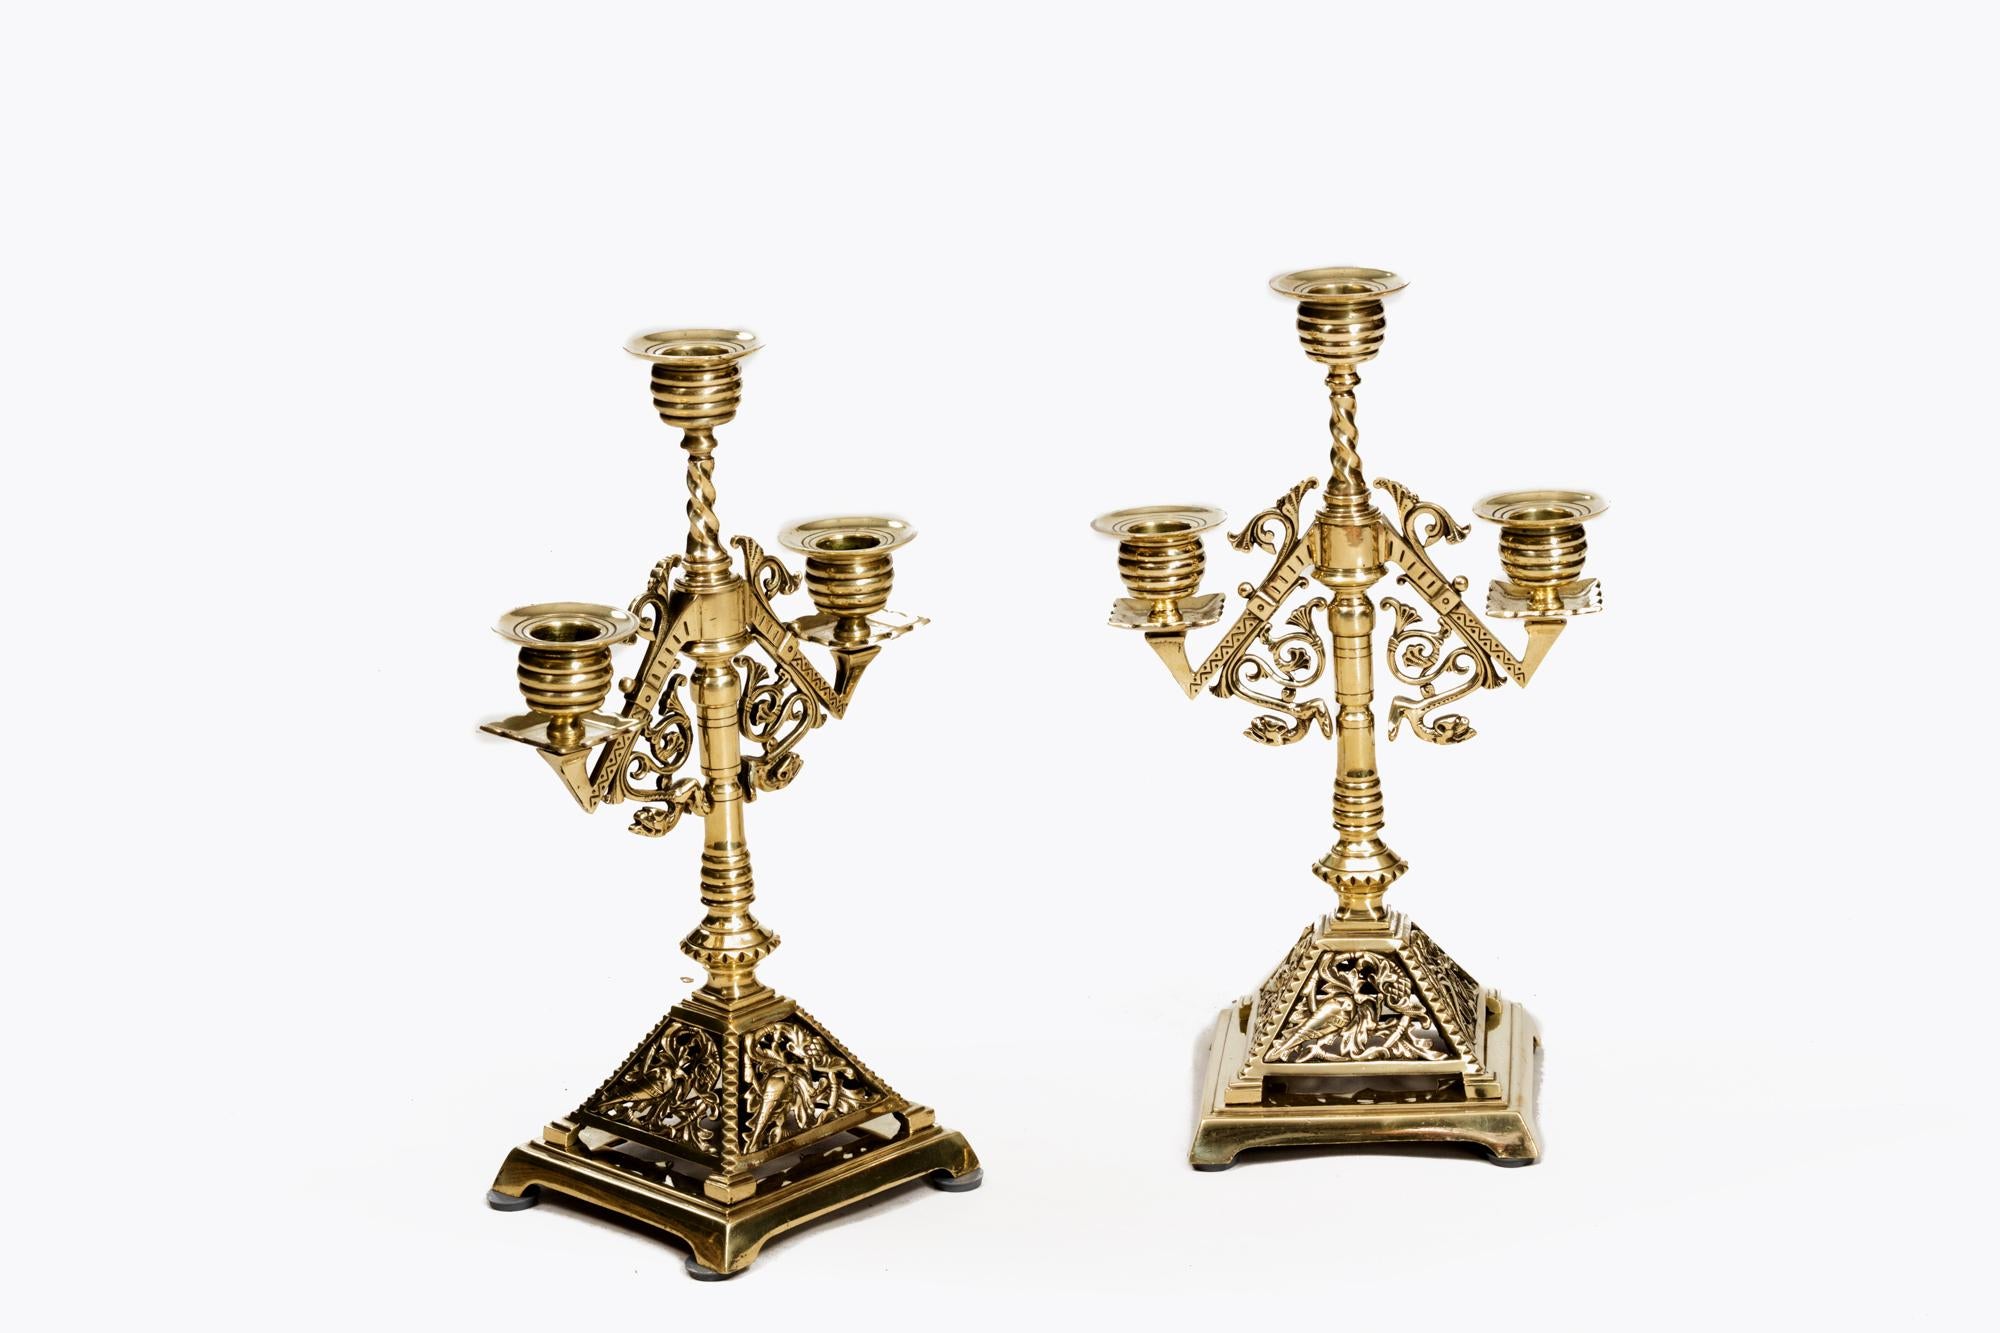 Pair brass three branch candlesticks in the Egyptianised style with acanthus leaf detailing and barley twists to the primary stems. The pair sit atop stylised pyramids with naturalistic detailing and terminate on simple square bases. 

They have